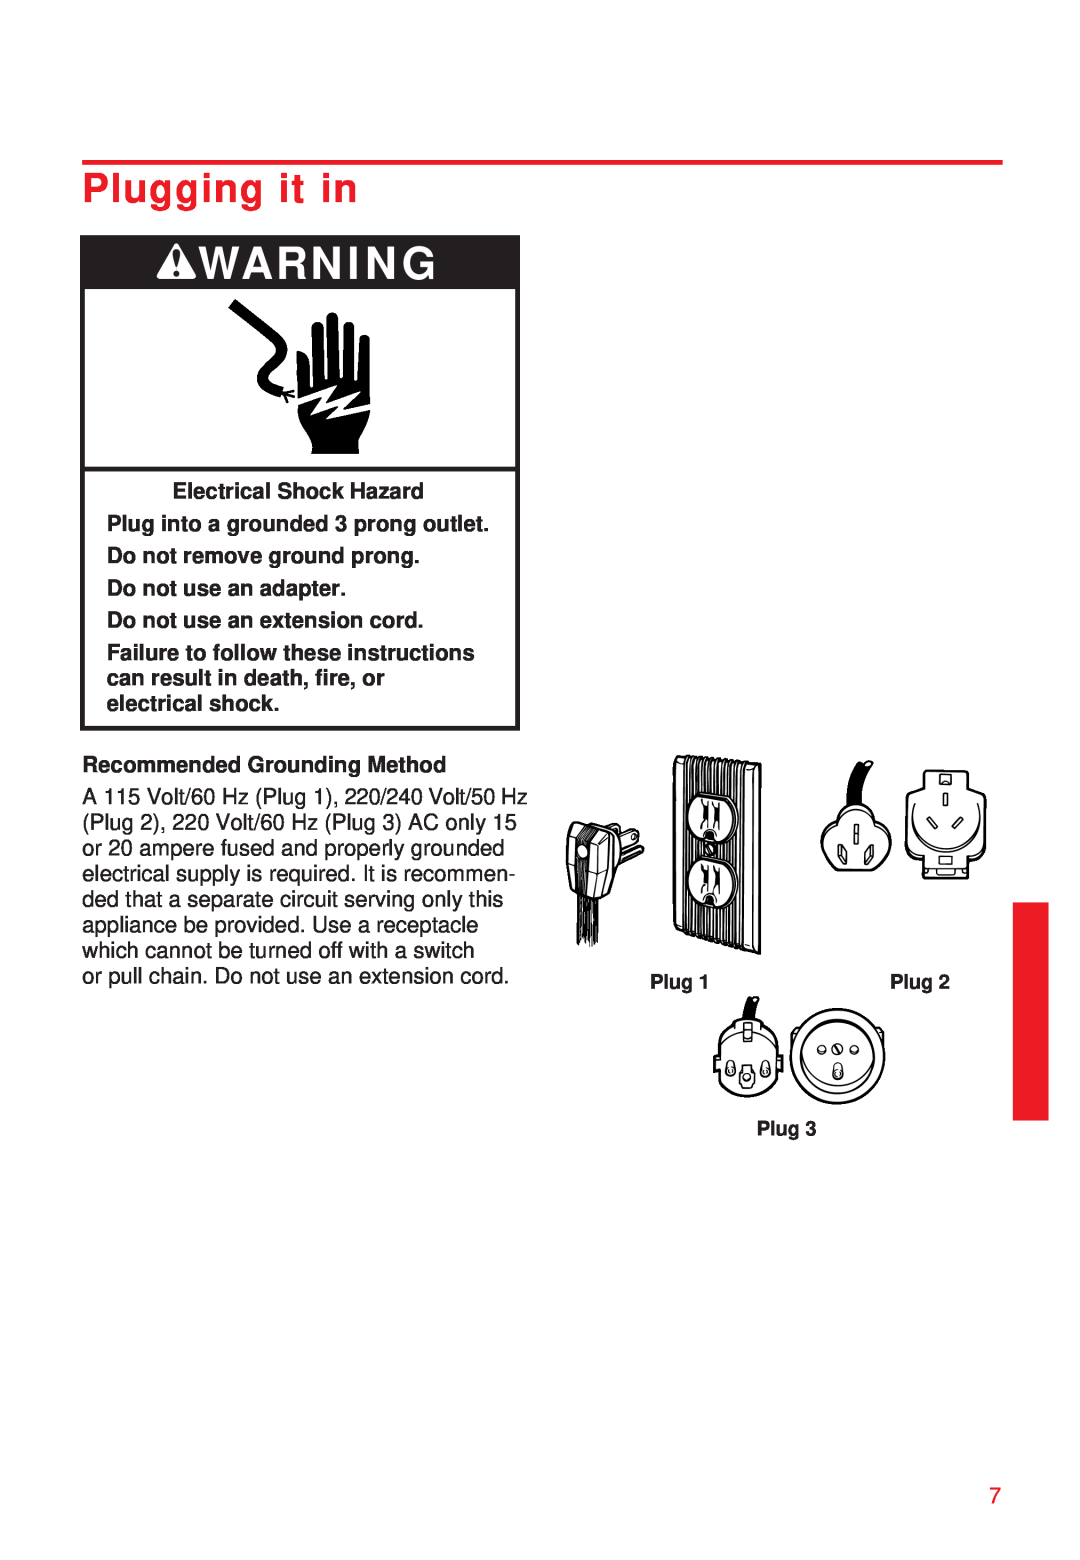 Whirlpool 2195258 manual Plugging it in, Electrical Shock Hazard Plug into a grounded 3 prong outlet, wWARNING 